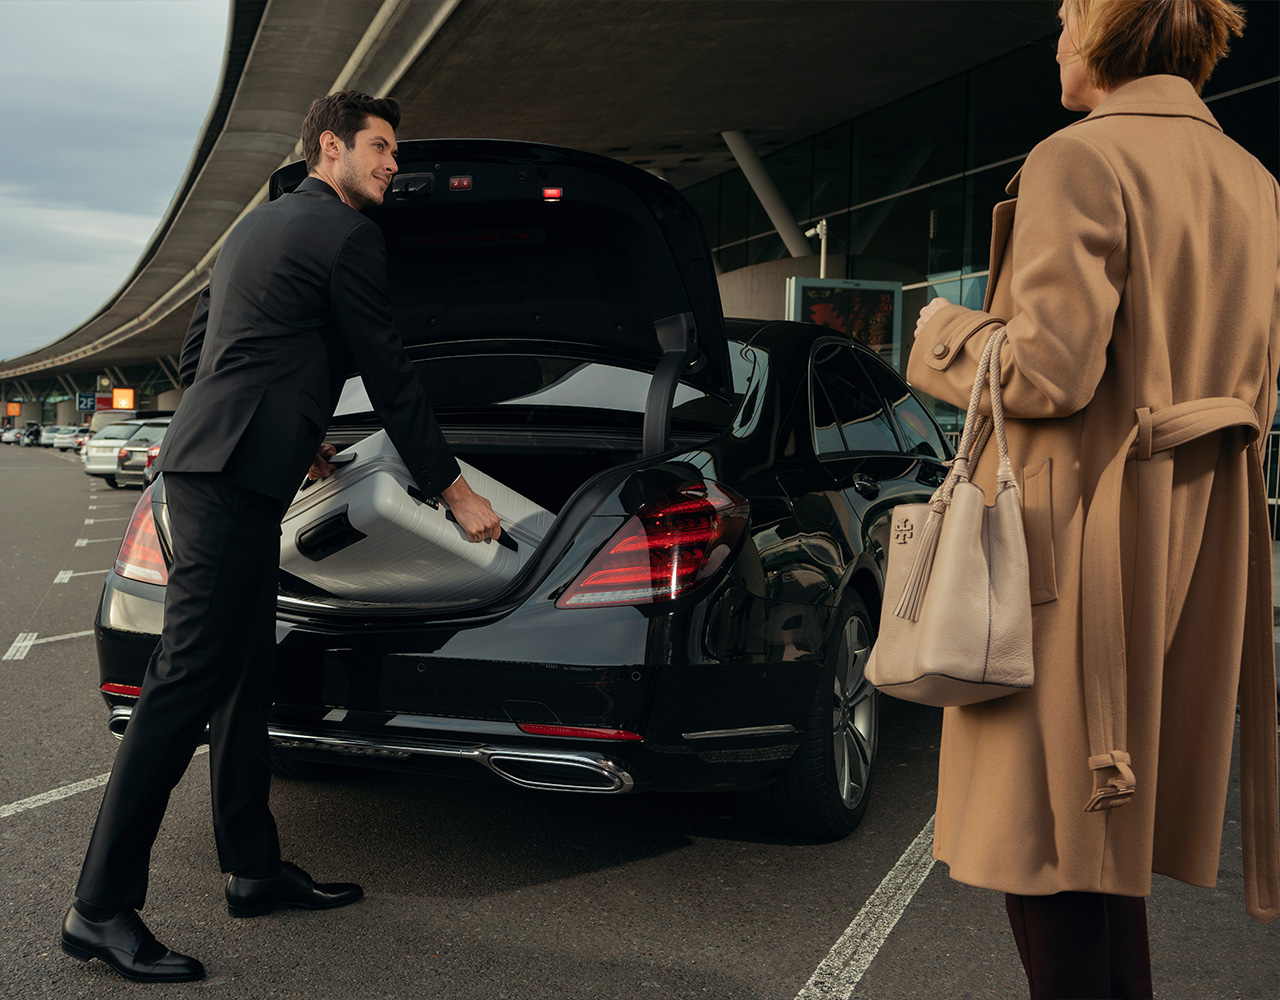 A chauffeur loads bags into the back of a car while a woman waits nearby.